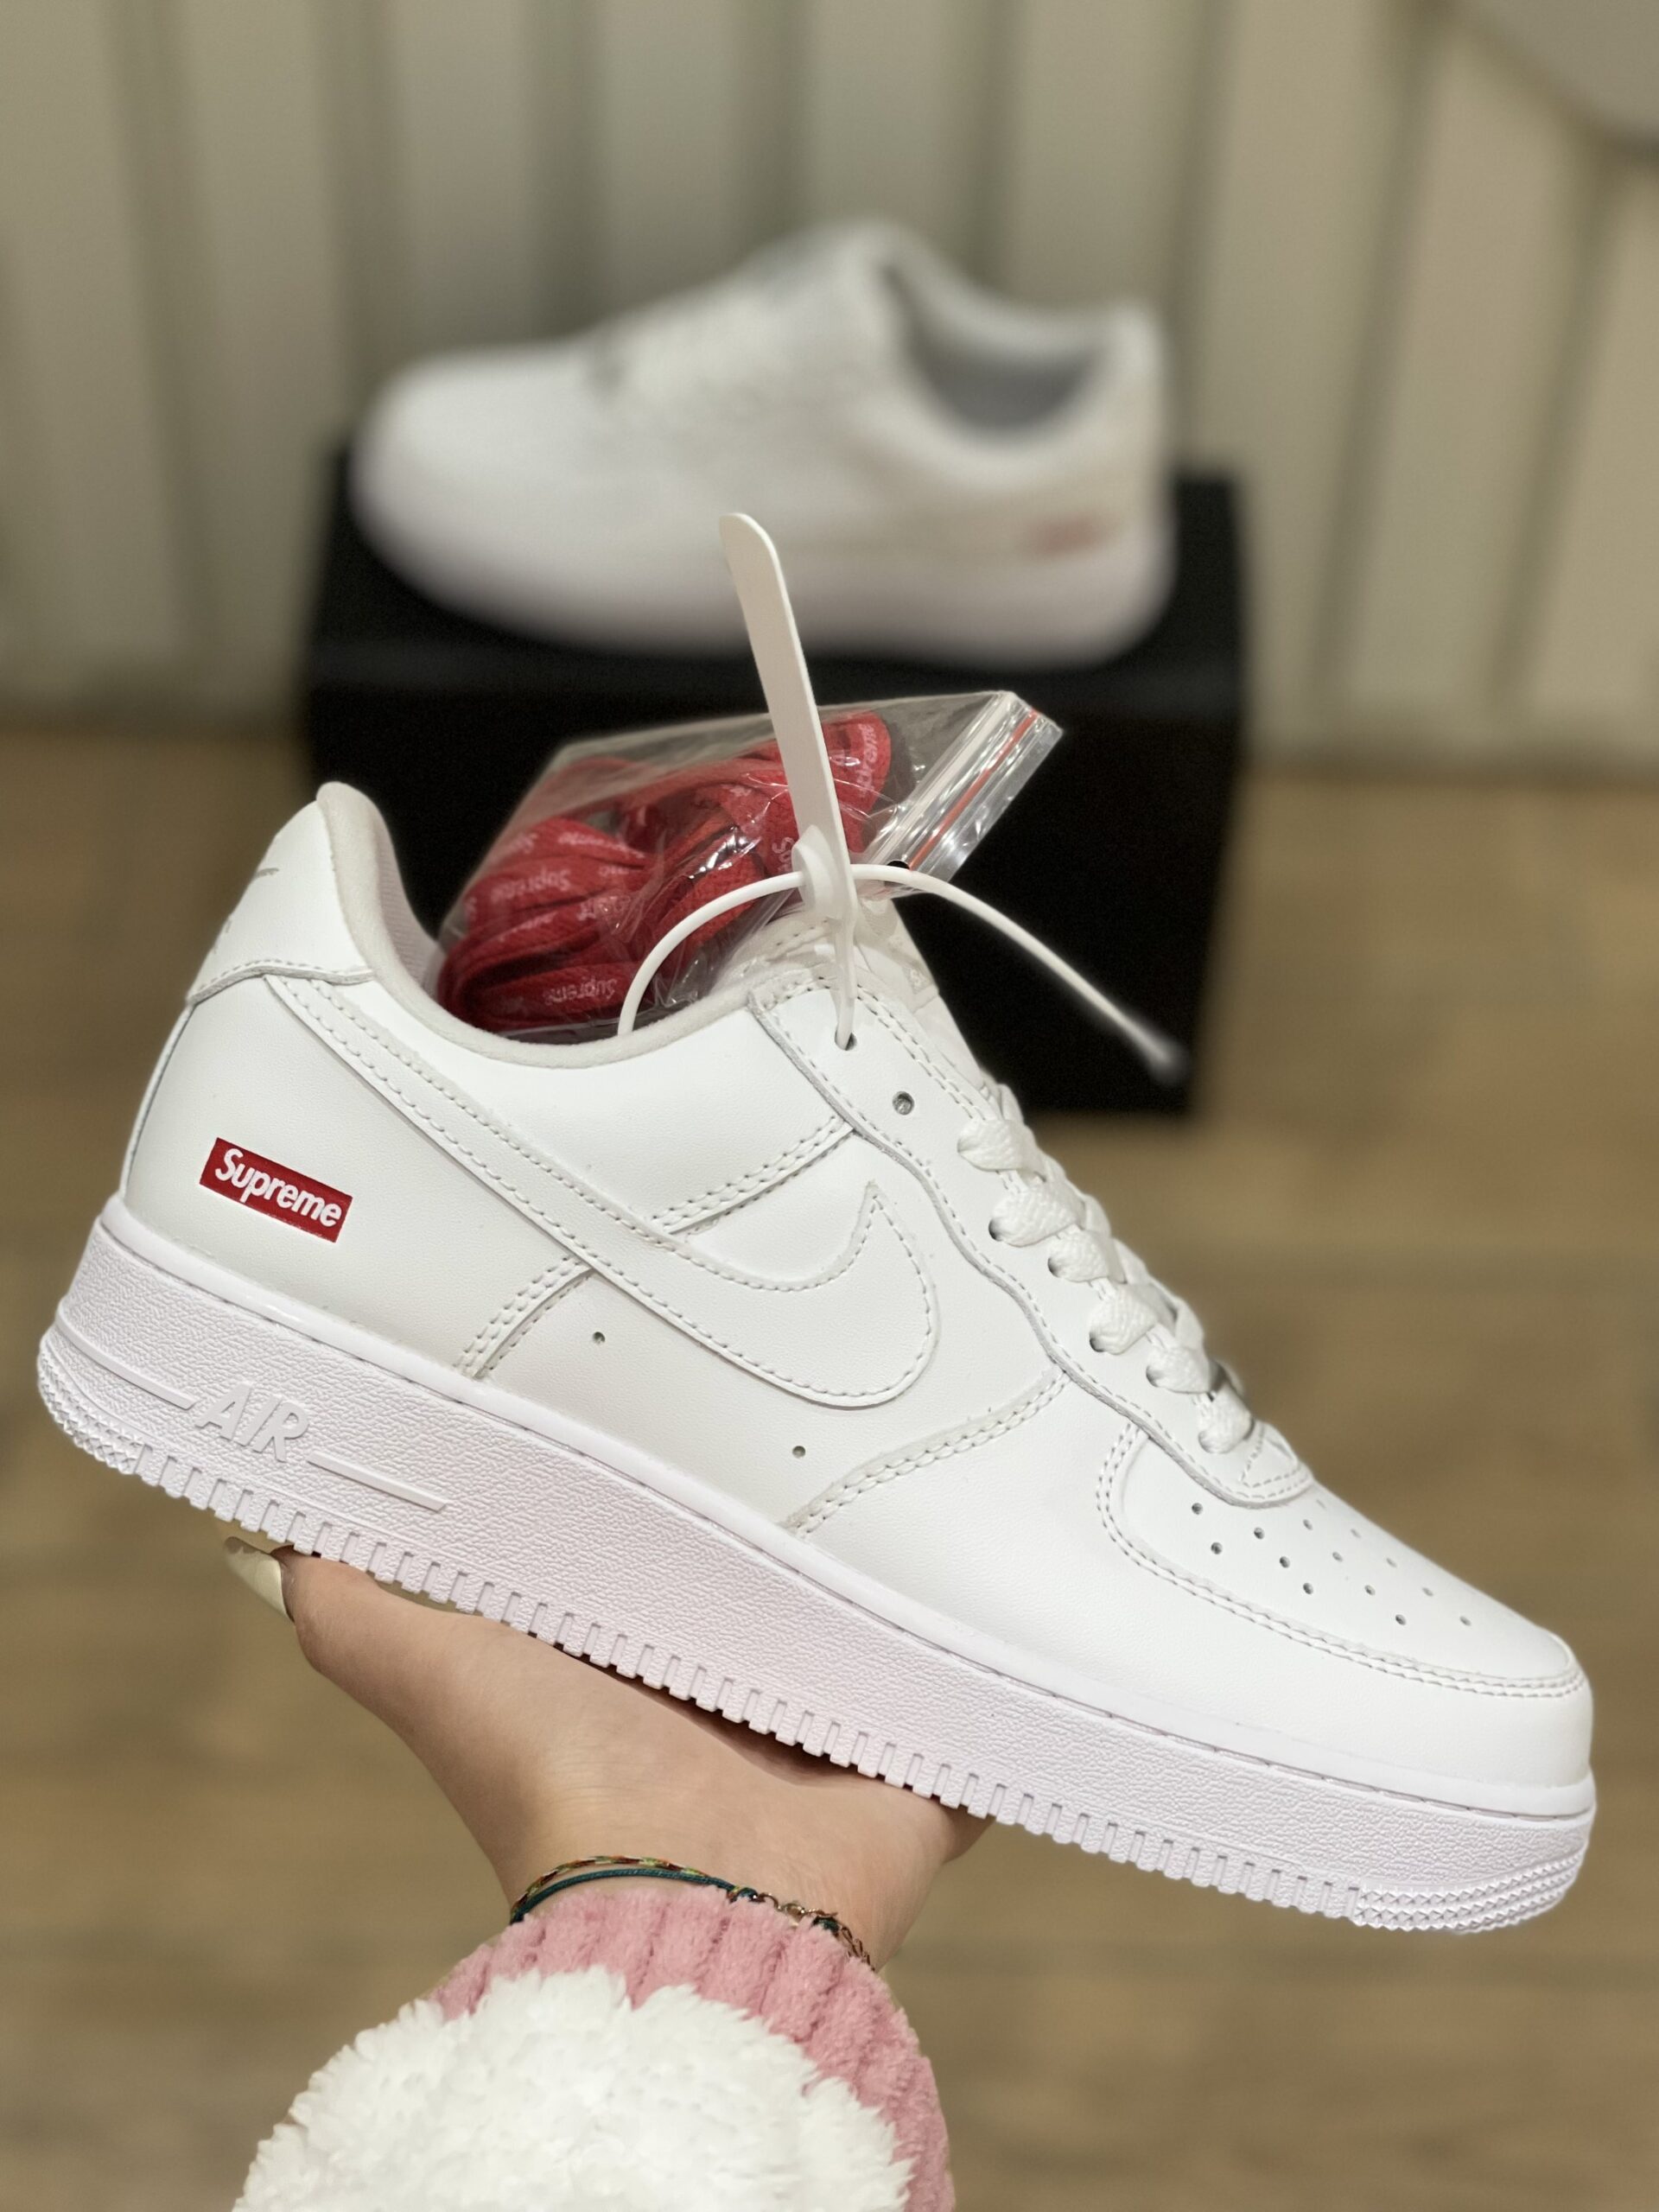 Giày Nike Air Force 1 Low Supreme White Red Best Quality